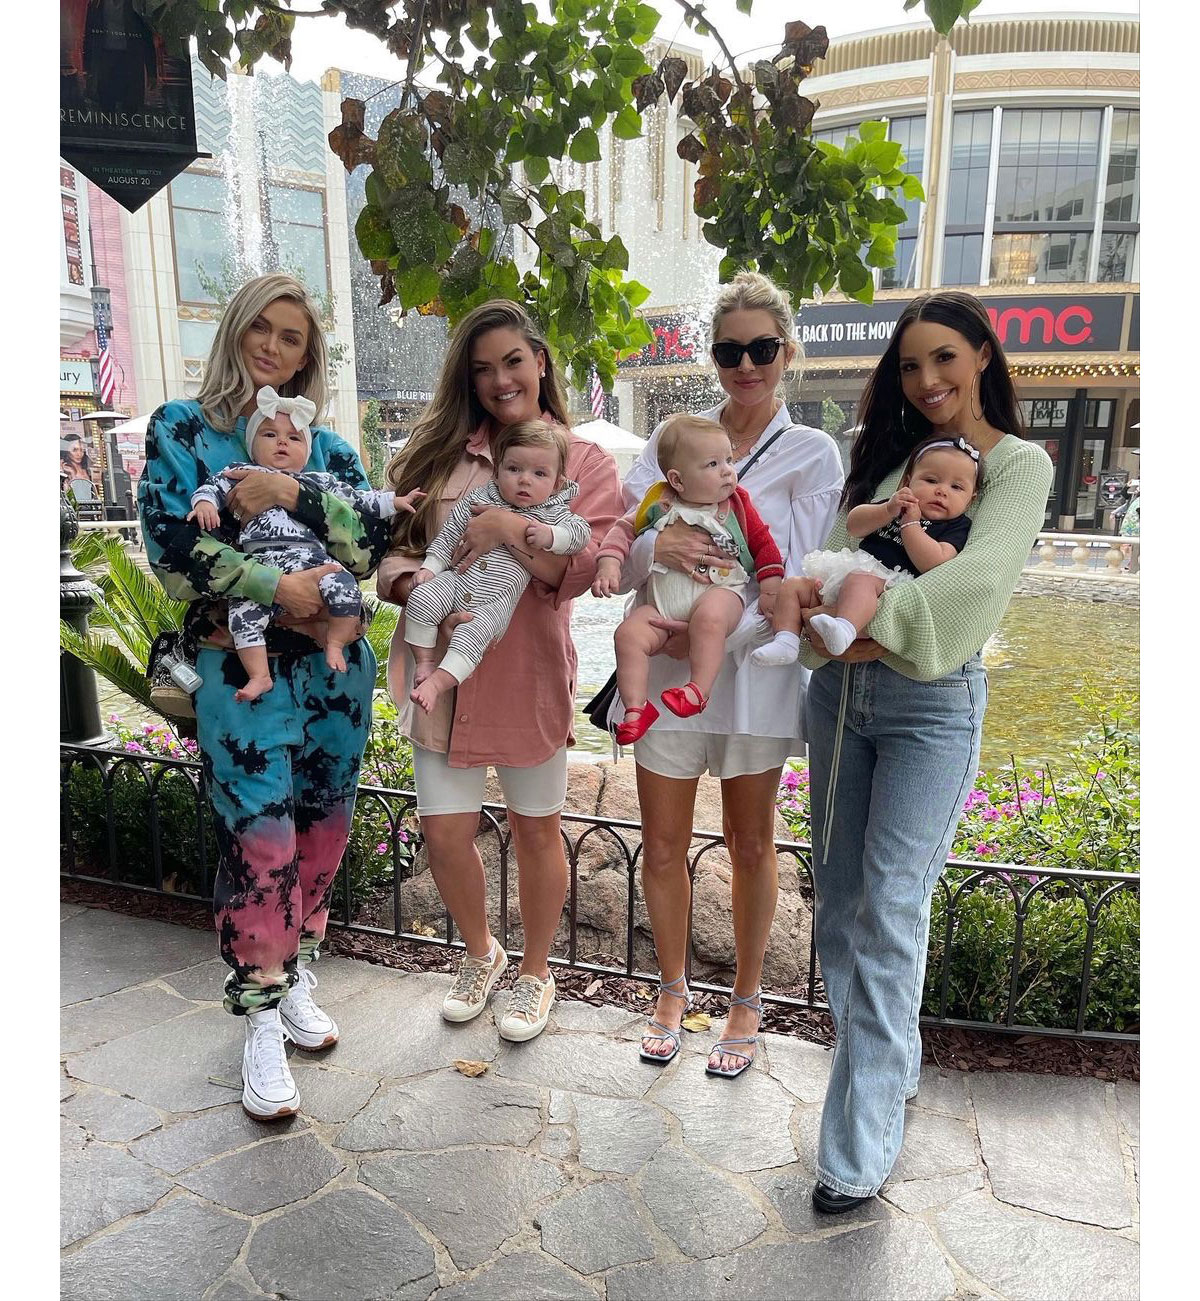 Scheana Shay Instagram 1 Lala Kent Stassi Schroeder Brittany Cartwright and Scheana Shay Reunite With 4 Babies for 1st Time